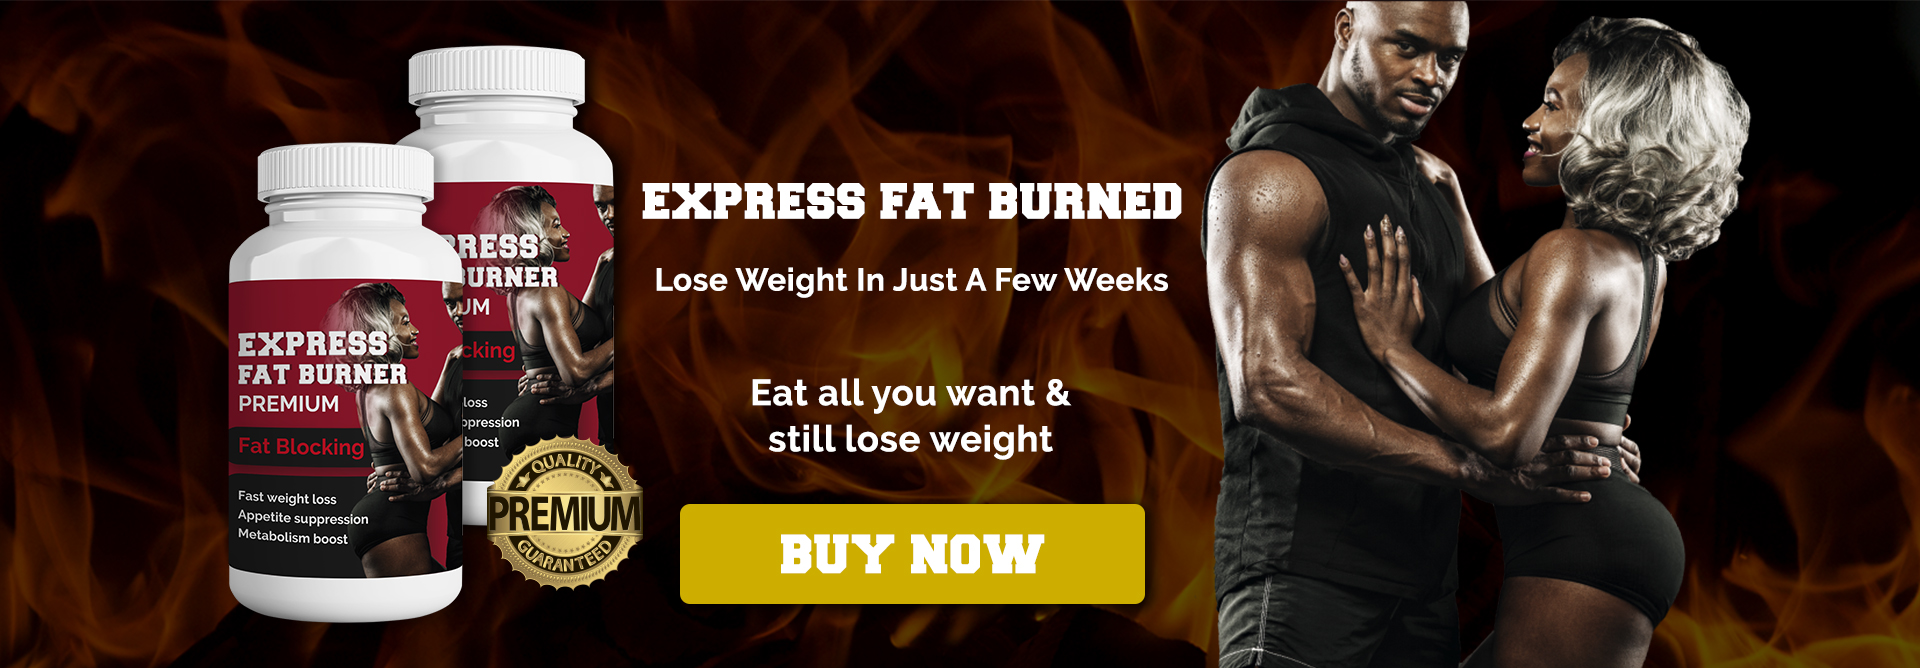 Express Fat Burner | Eat all you want and still lose weight | Order now!